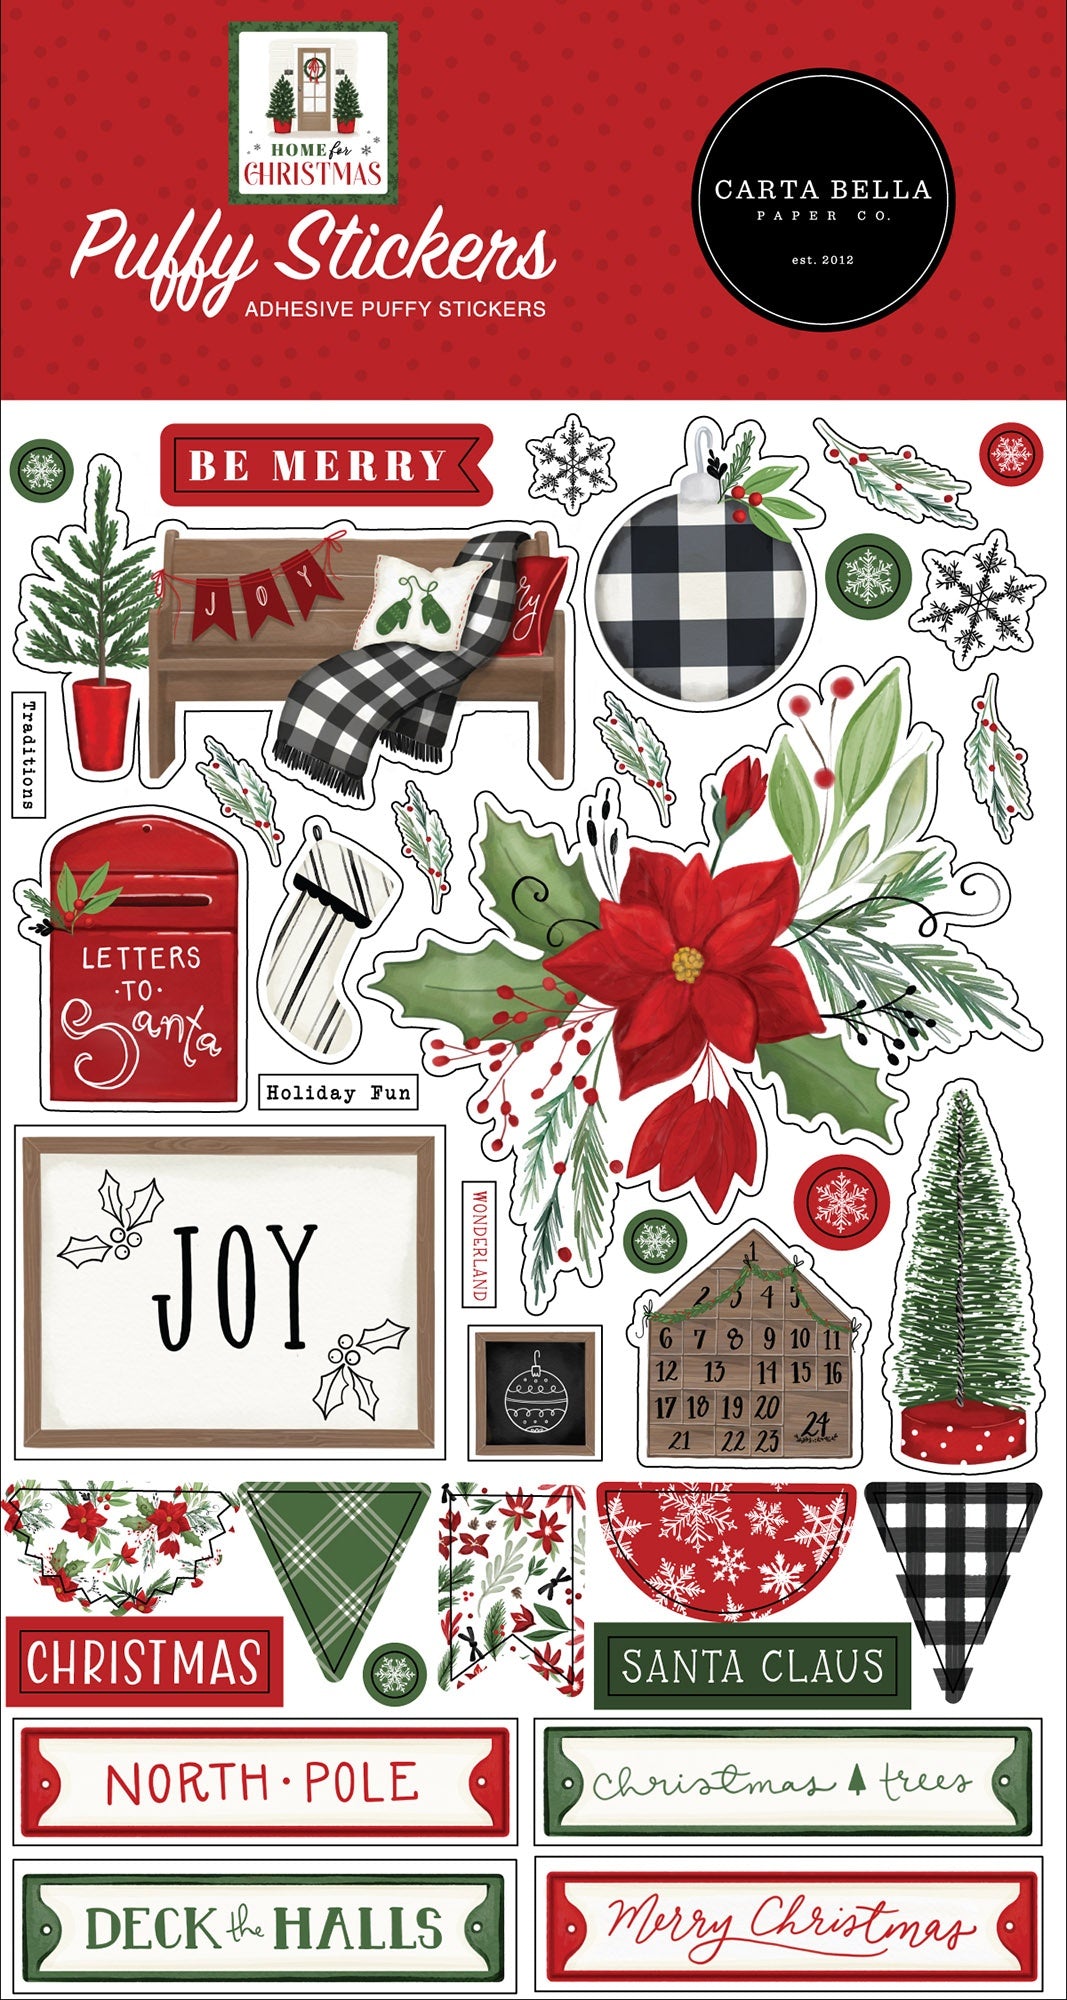 The Magic Of Christmas Cardstock Stickers 12X12-Elements